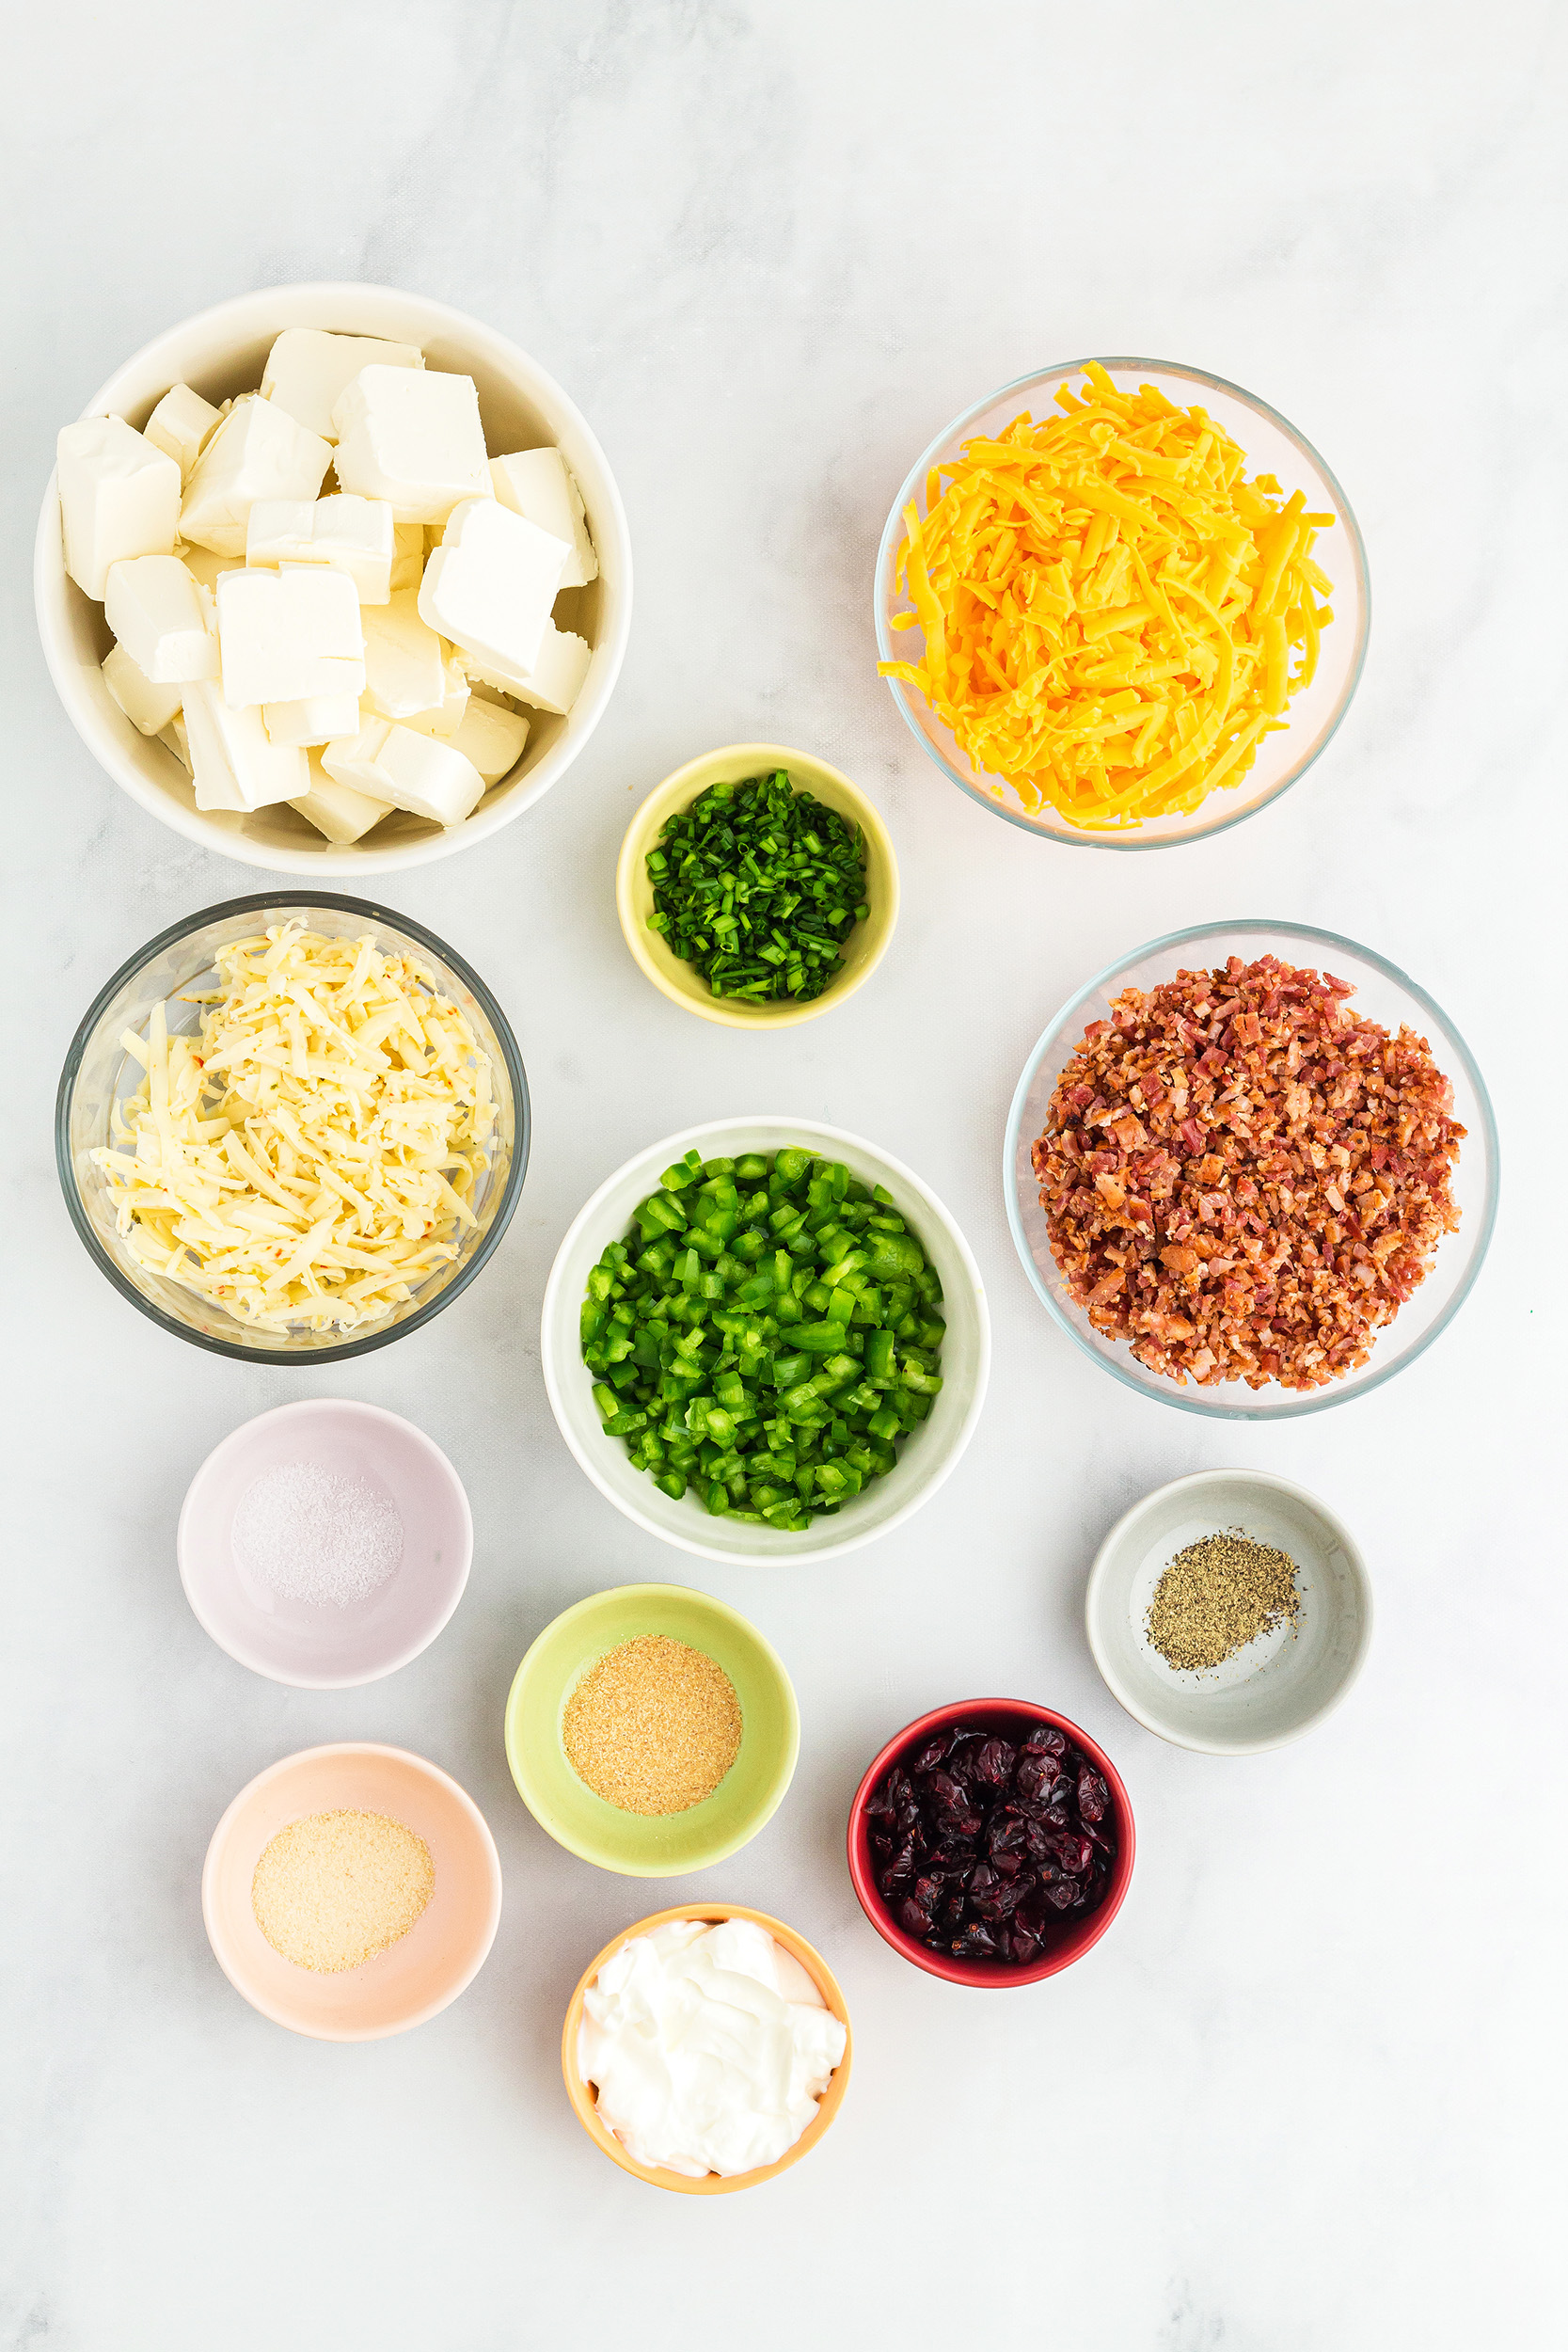 Bacon Jalapeño Cheese Ball Recipe ingredients in small bowls